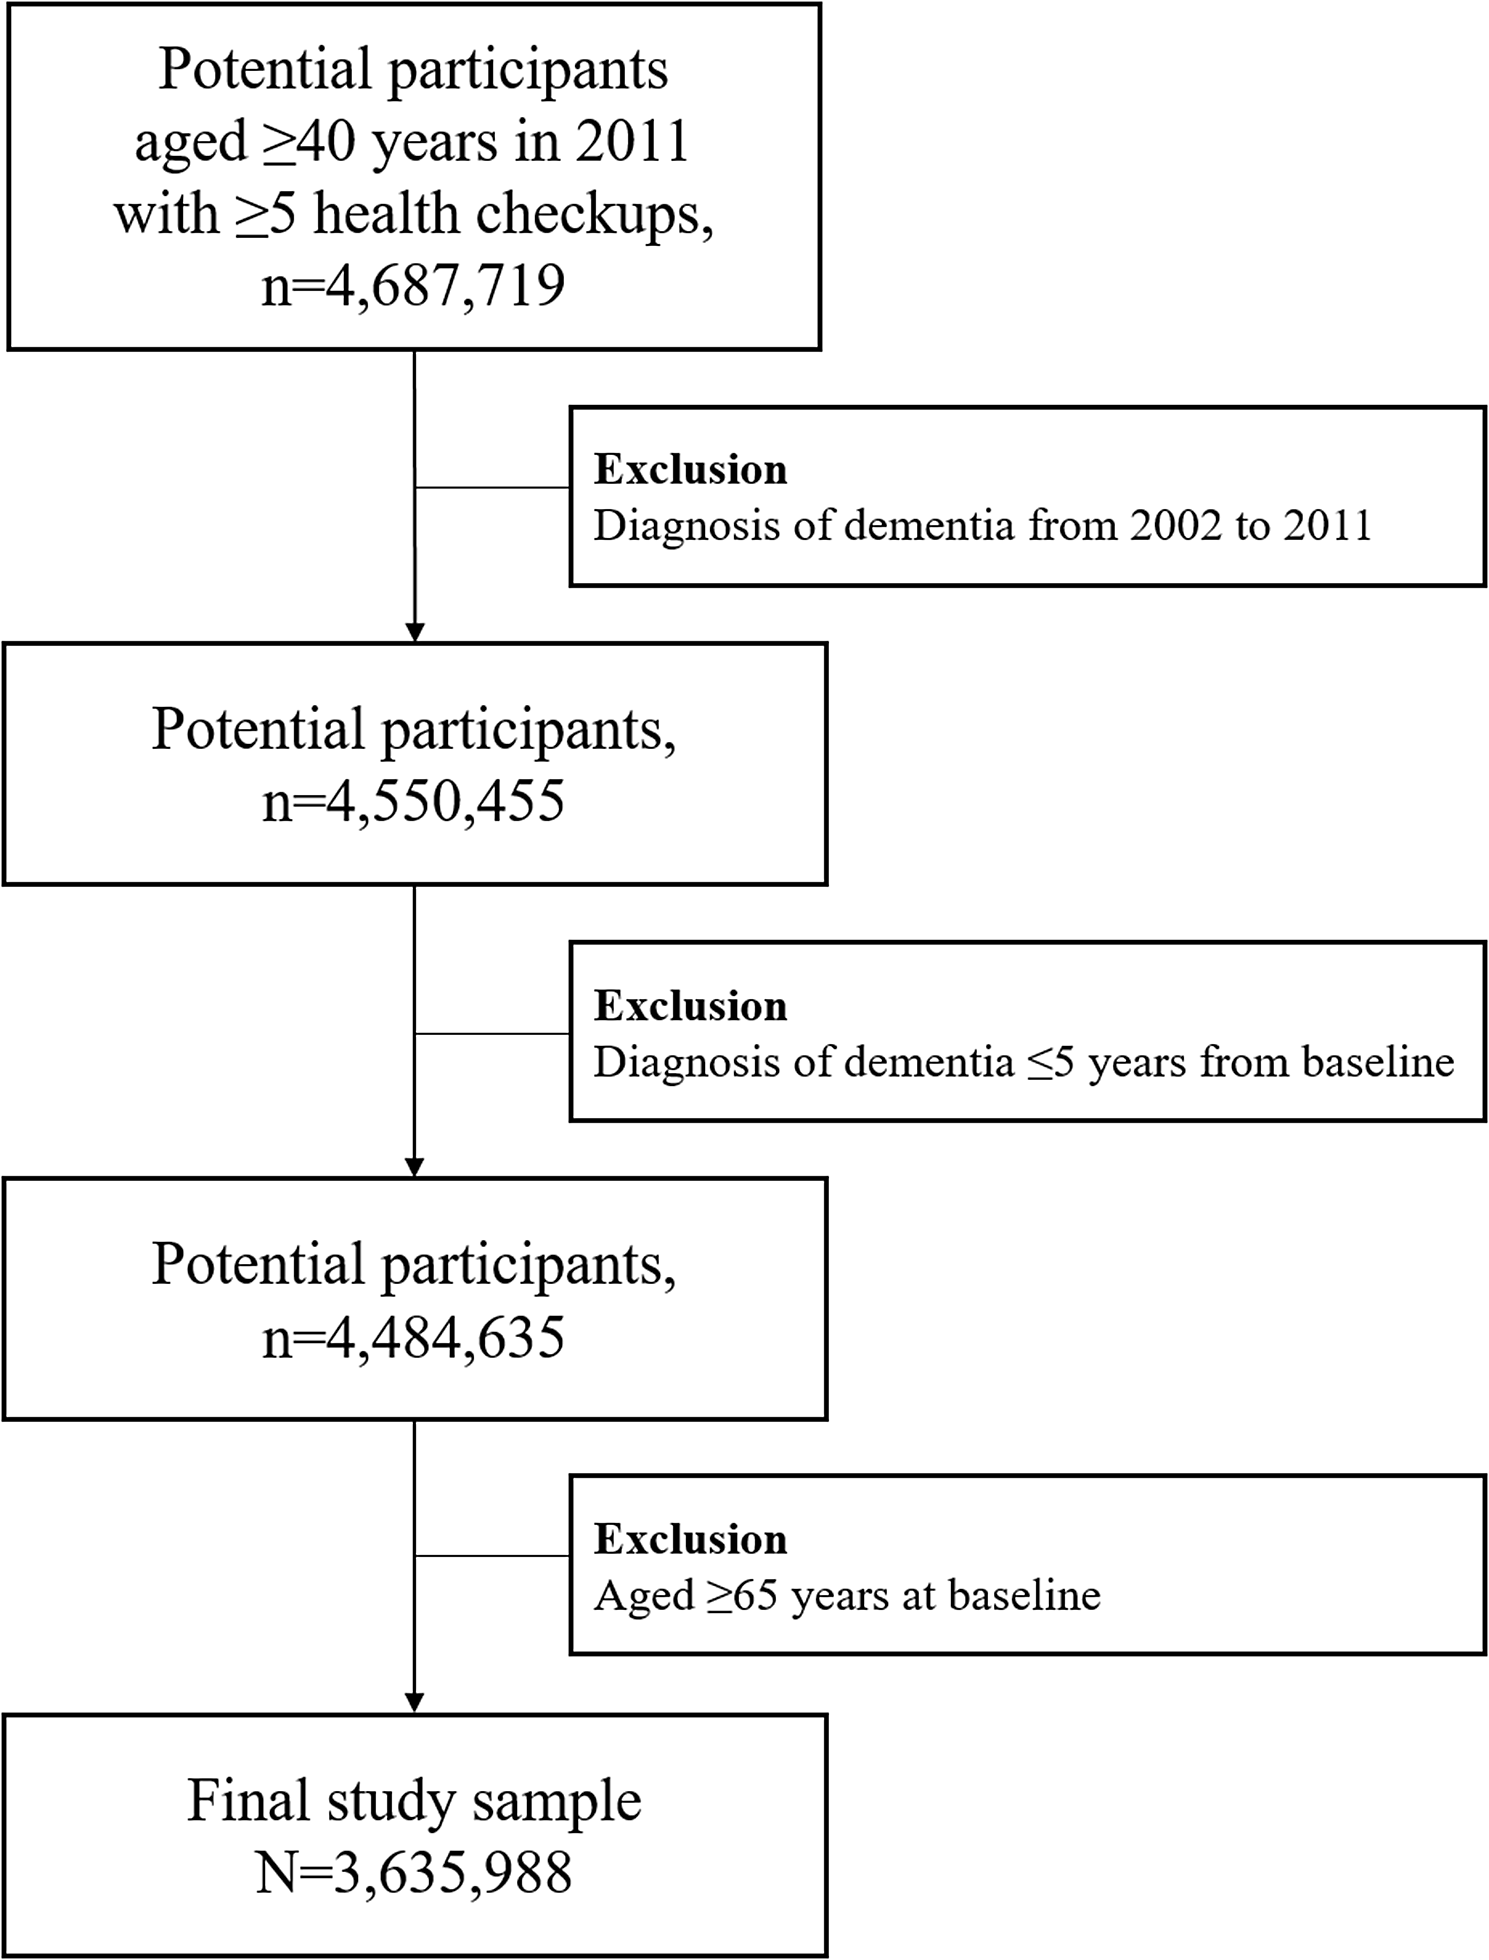 Association of midlife body-weight variability and cycles with earlier dementia onset: a nationwide cohort study